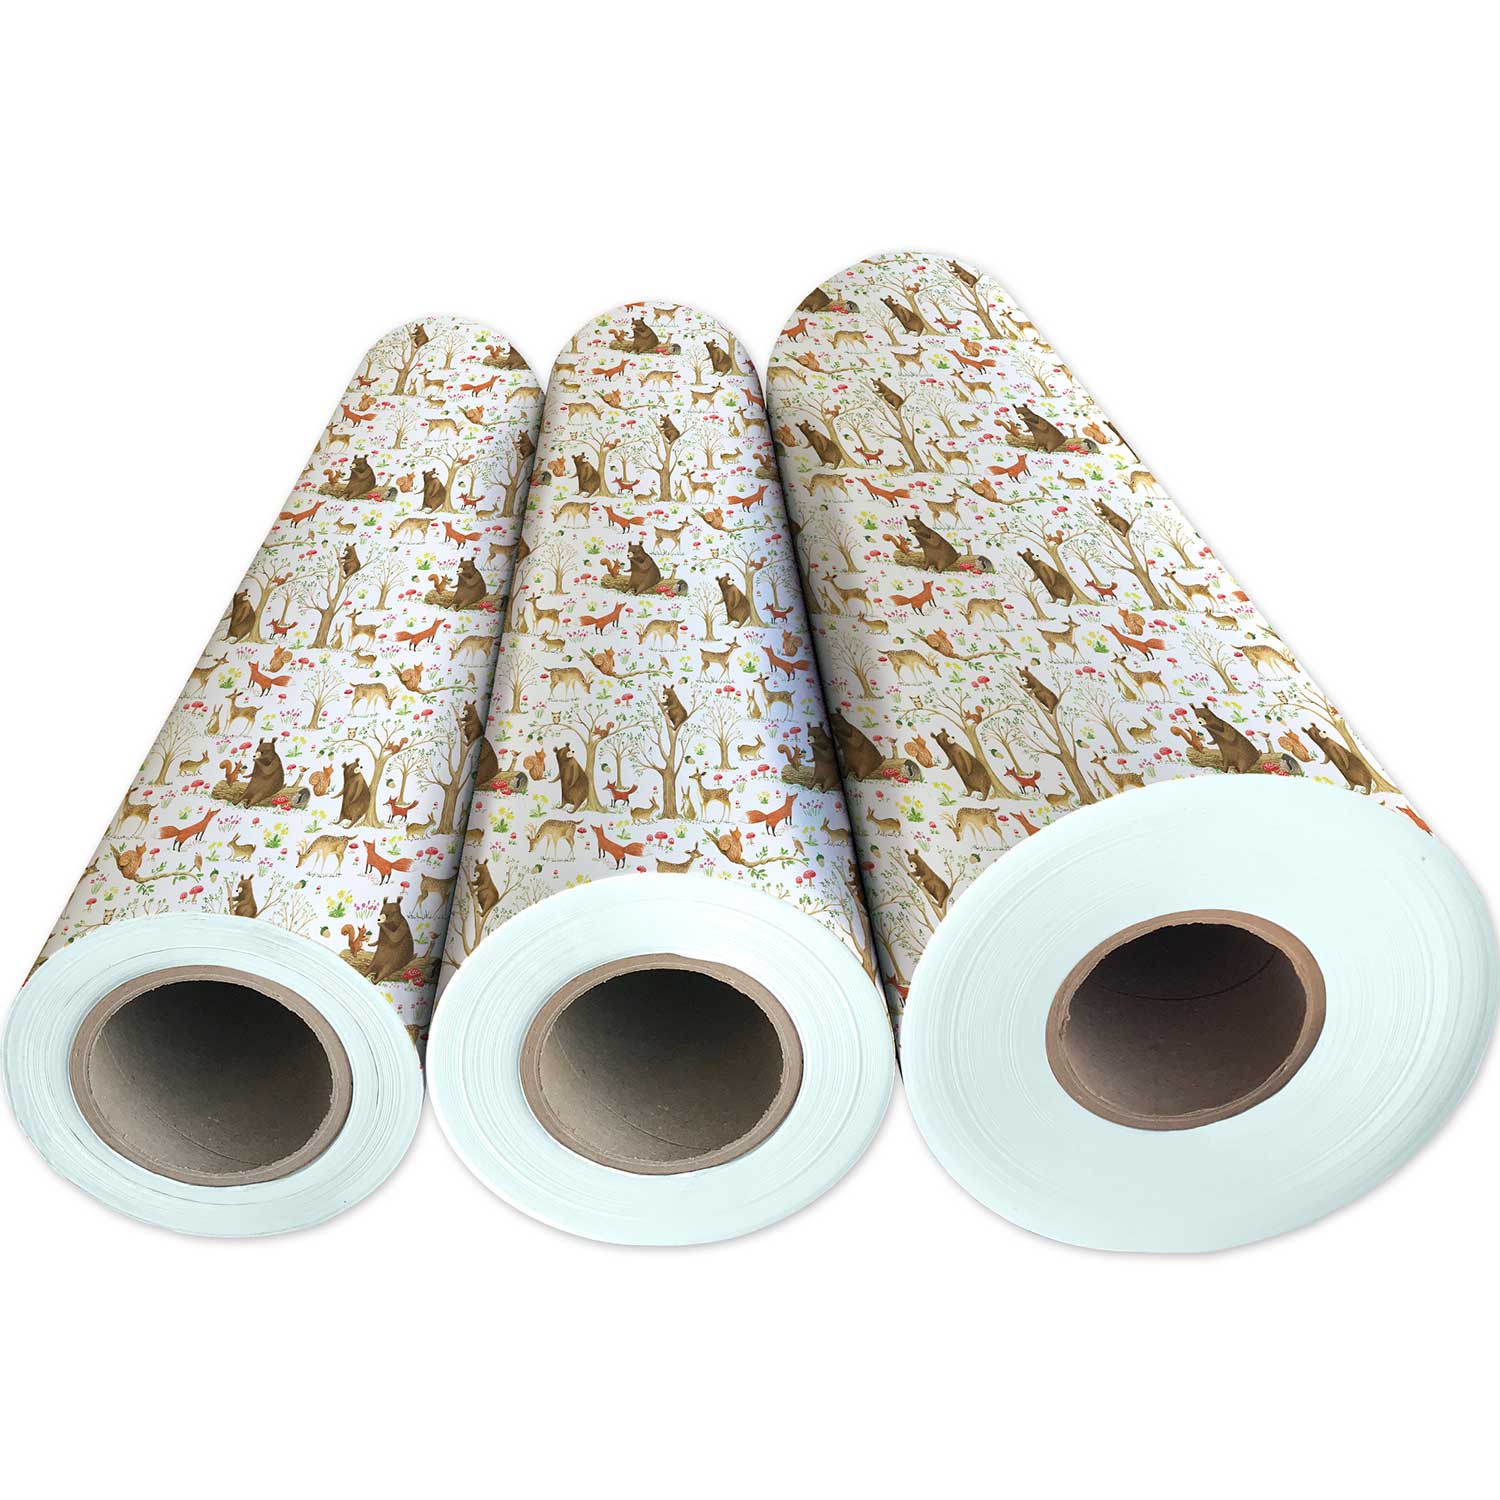  BIOBROWN Baby Shower Wrapping Paper Rolls Neutral for